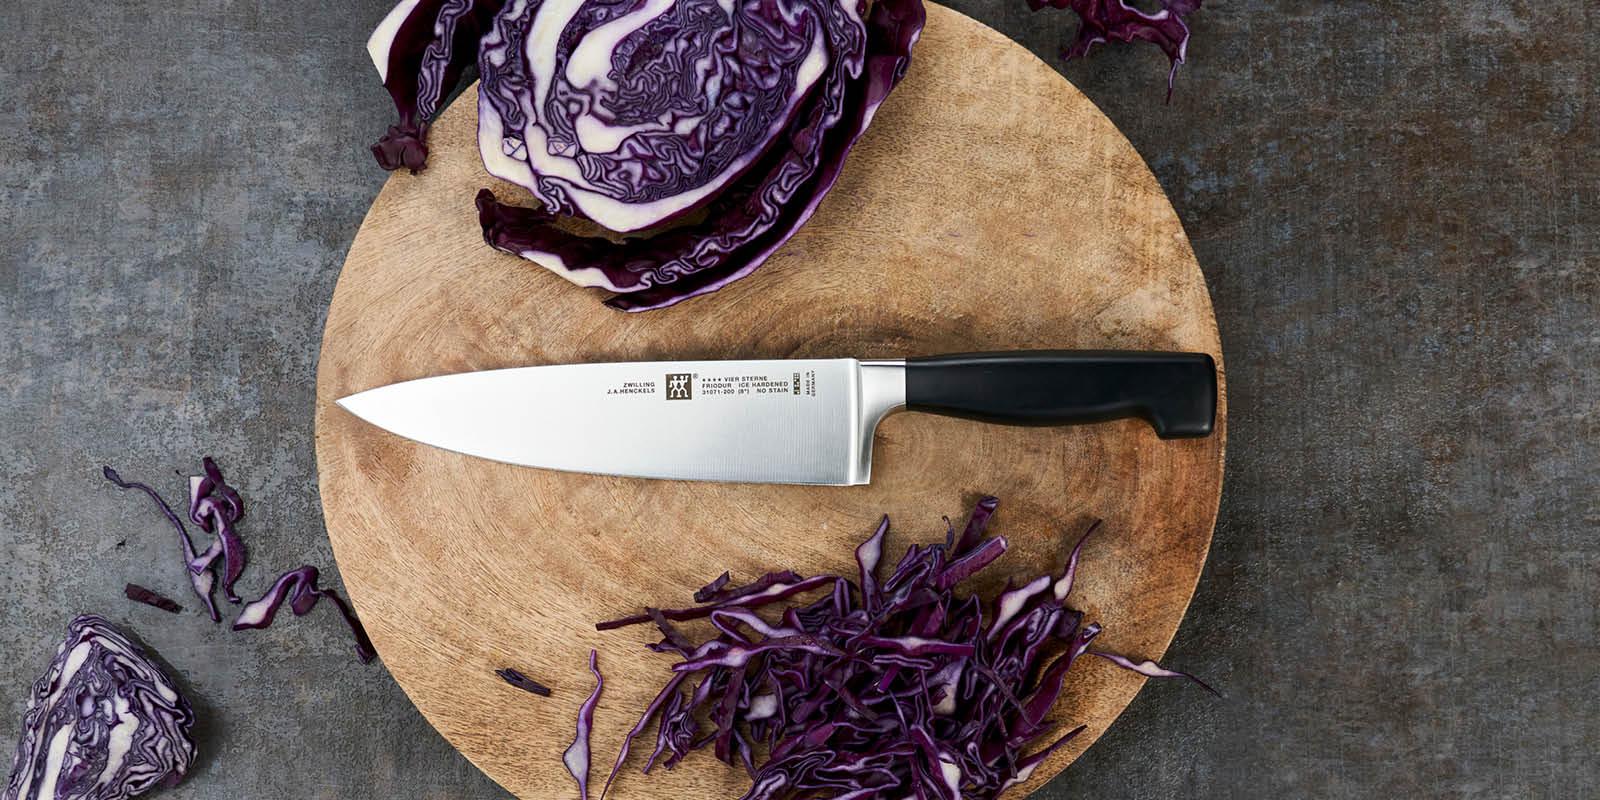 https://www.zwilling.com/on/demandware.static/-/Sites-zwilling-ca-Library/default/dw667ab5e2/images/product-content/masonry-content/zwilling/cutlery/four-star/31071-201-0_Lifestyle_Image_Series_OS_1200x600.jpg